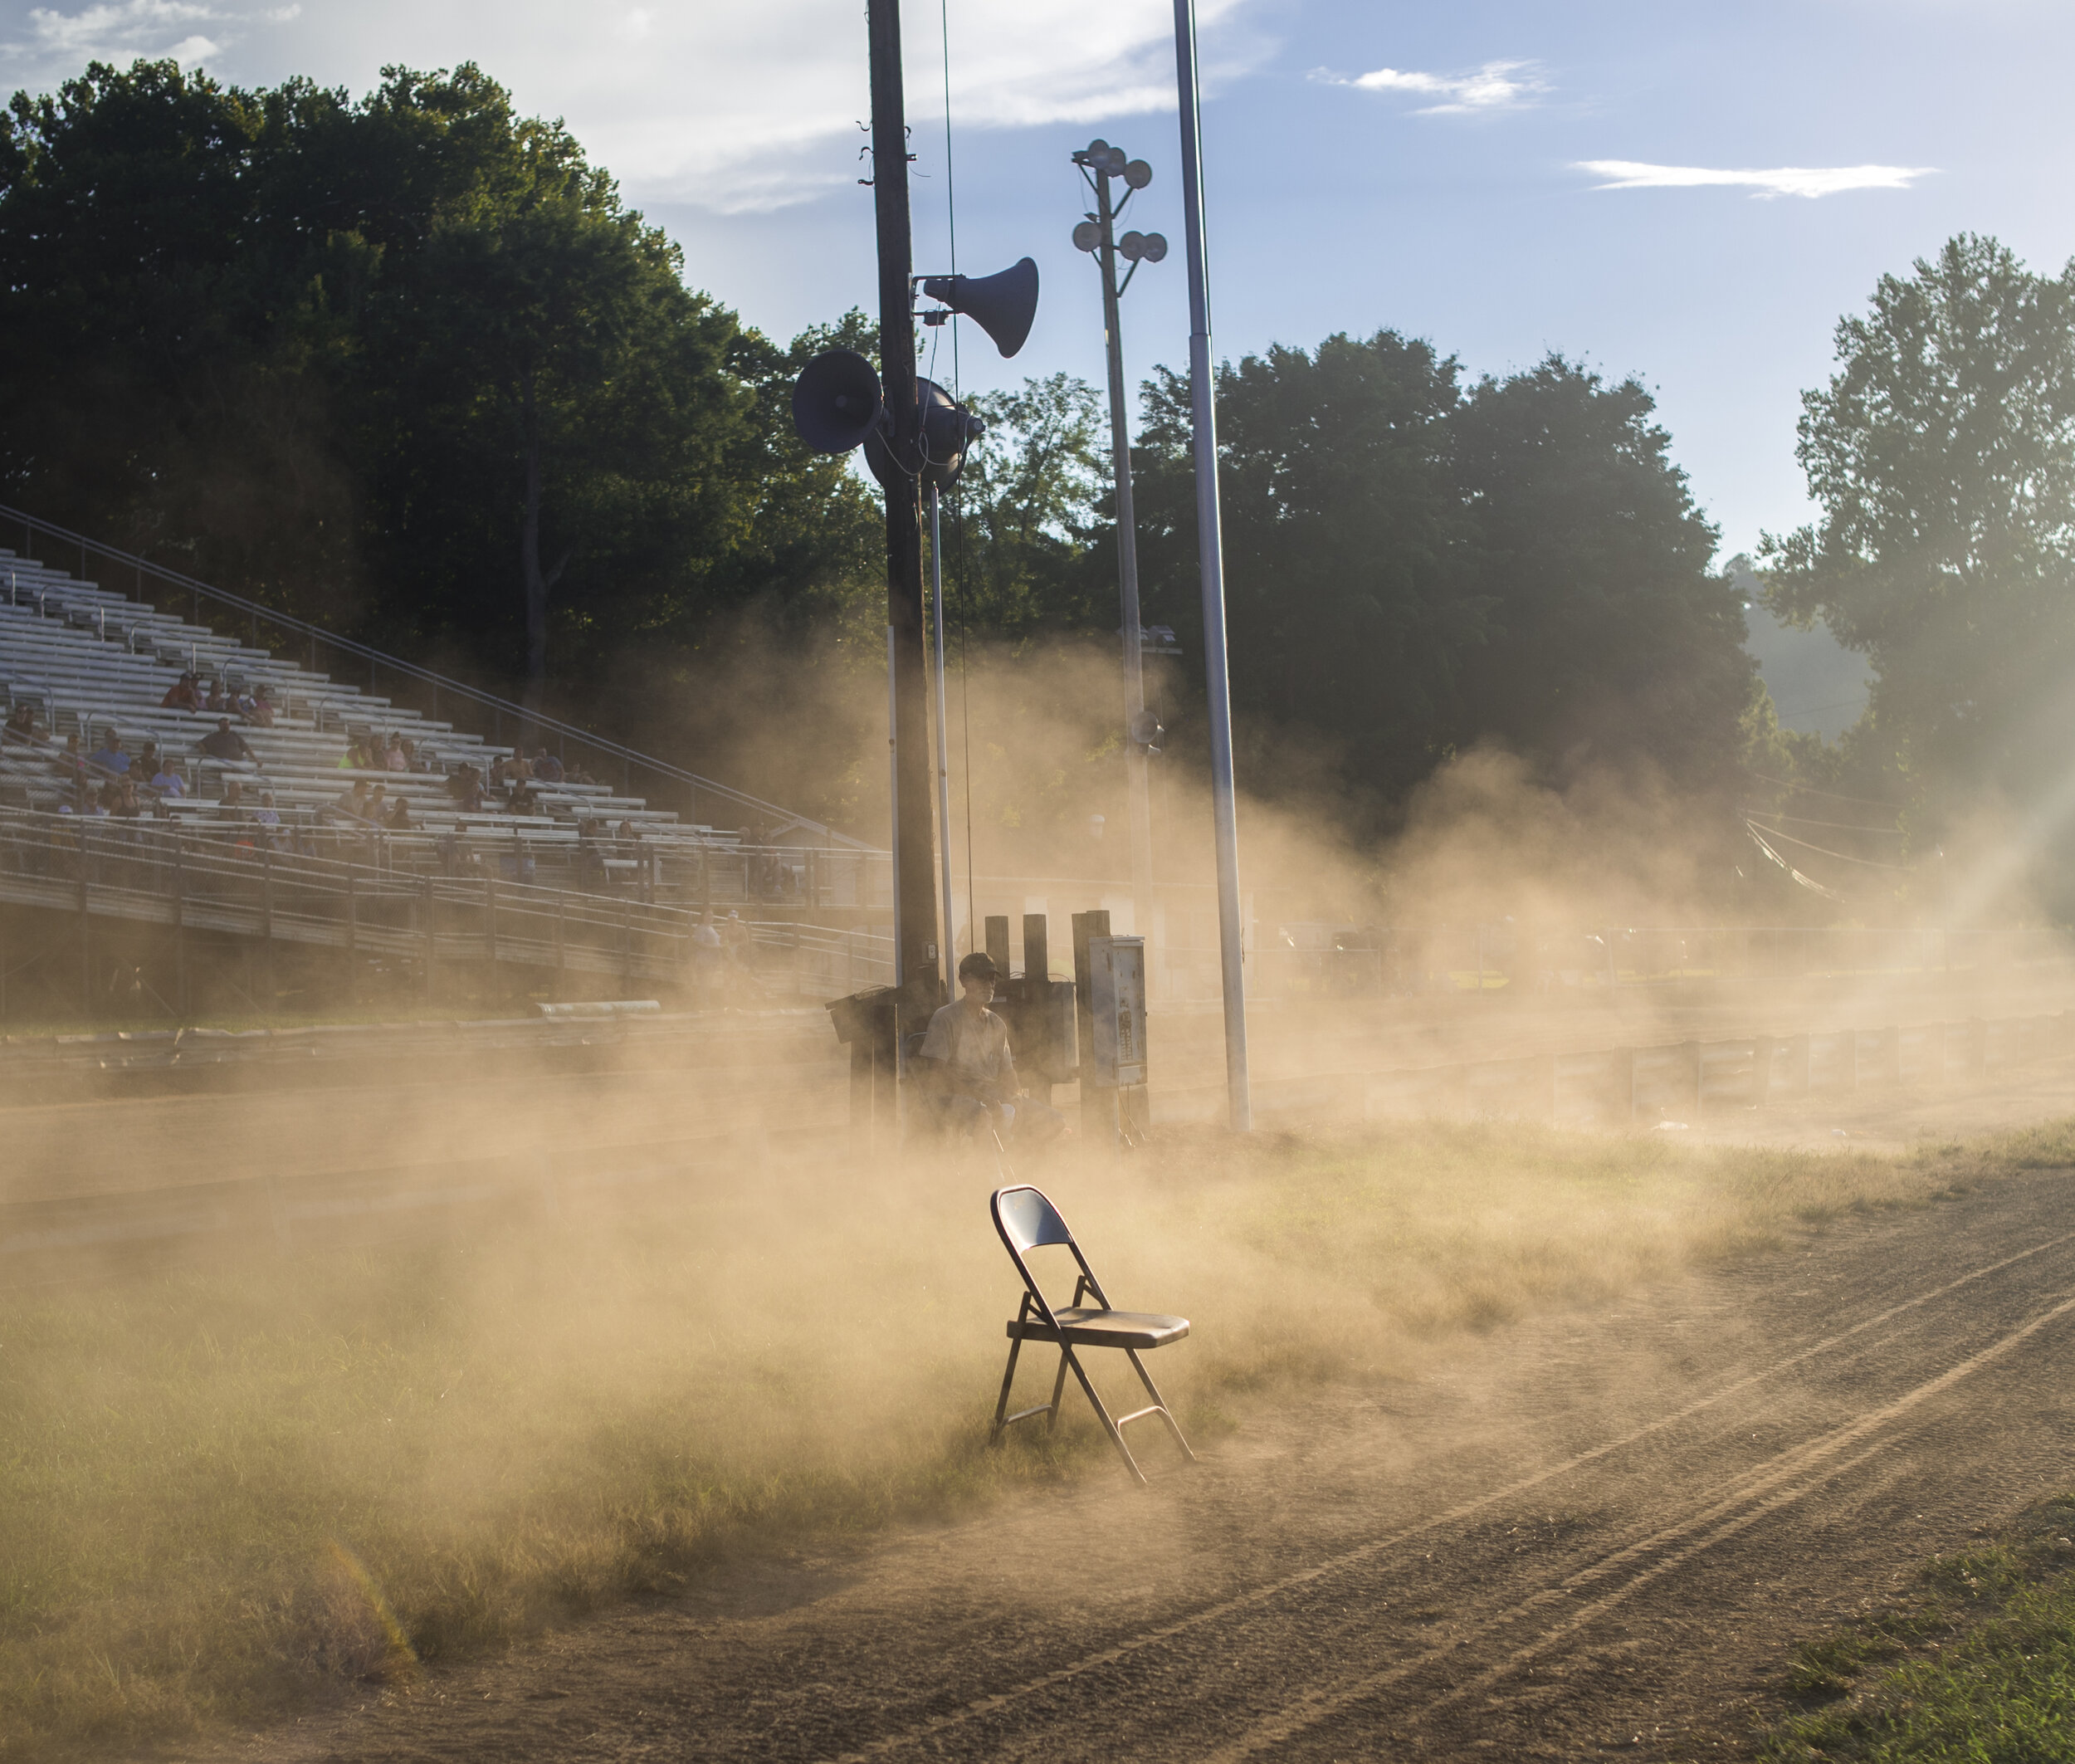  Dust clouds drift after two ATVs drag race on a dirt track in Marietta, Ohio on June 30, 2018.    